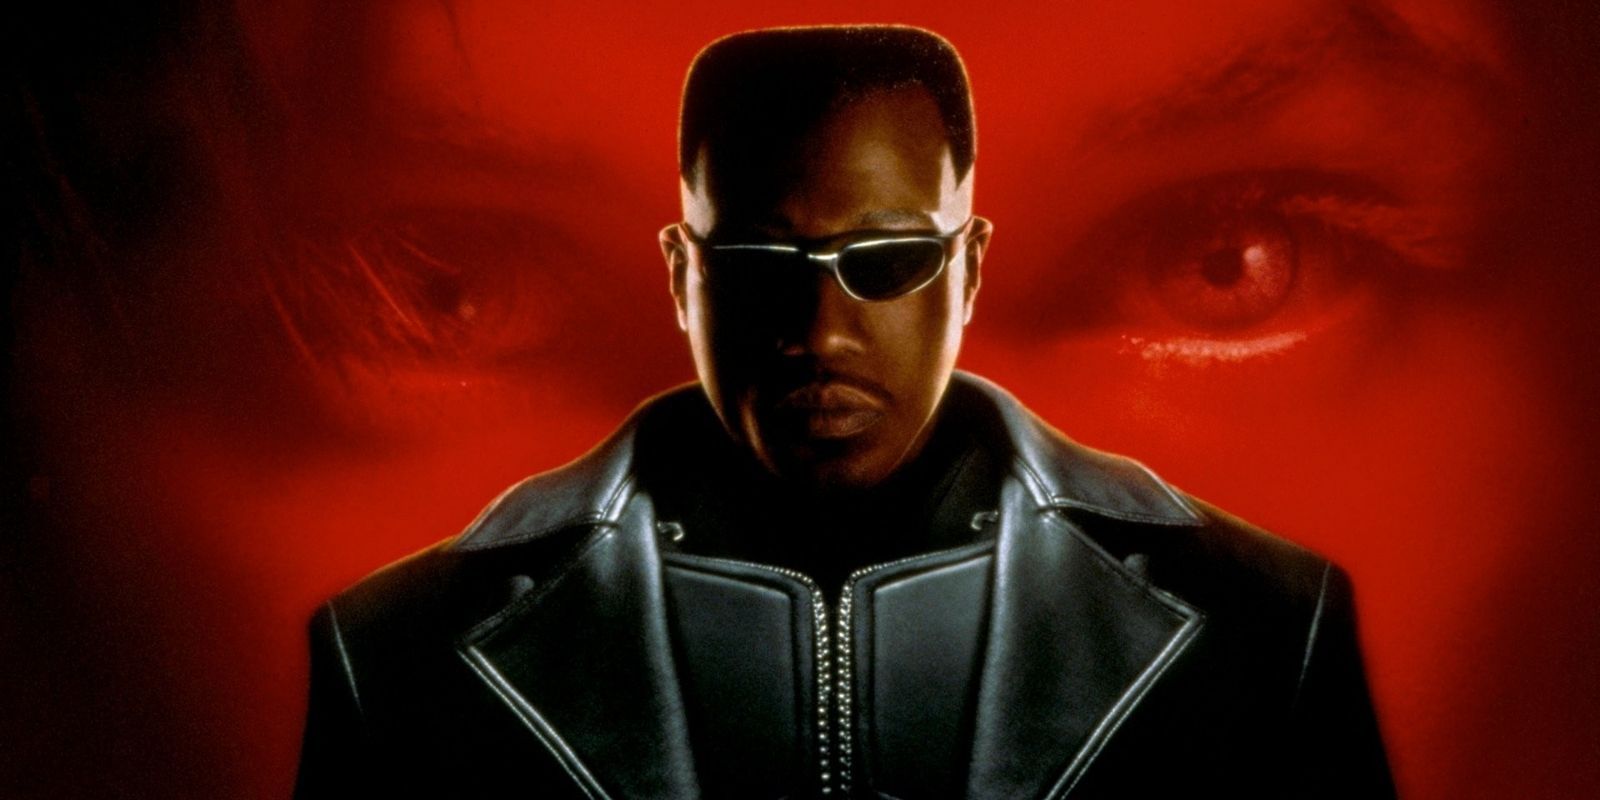 Wesley Snipes as Blade in the 1998 classic Marvel movie